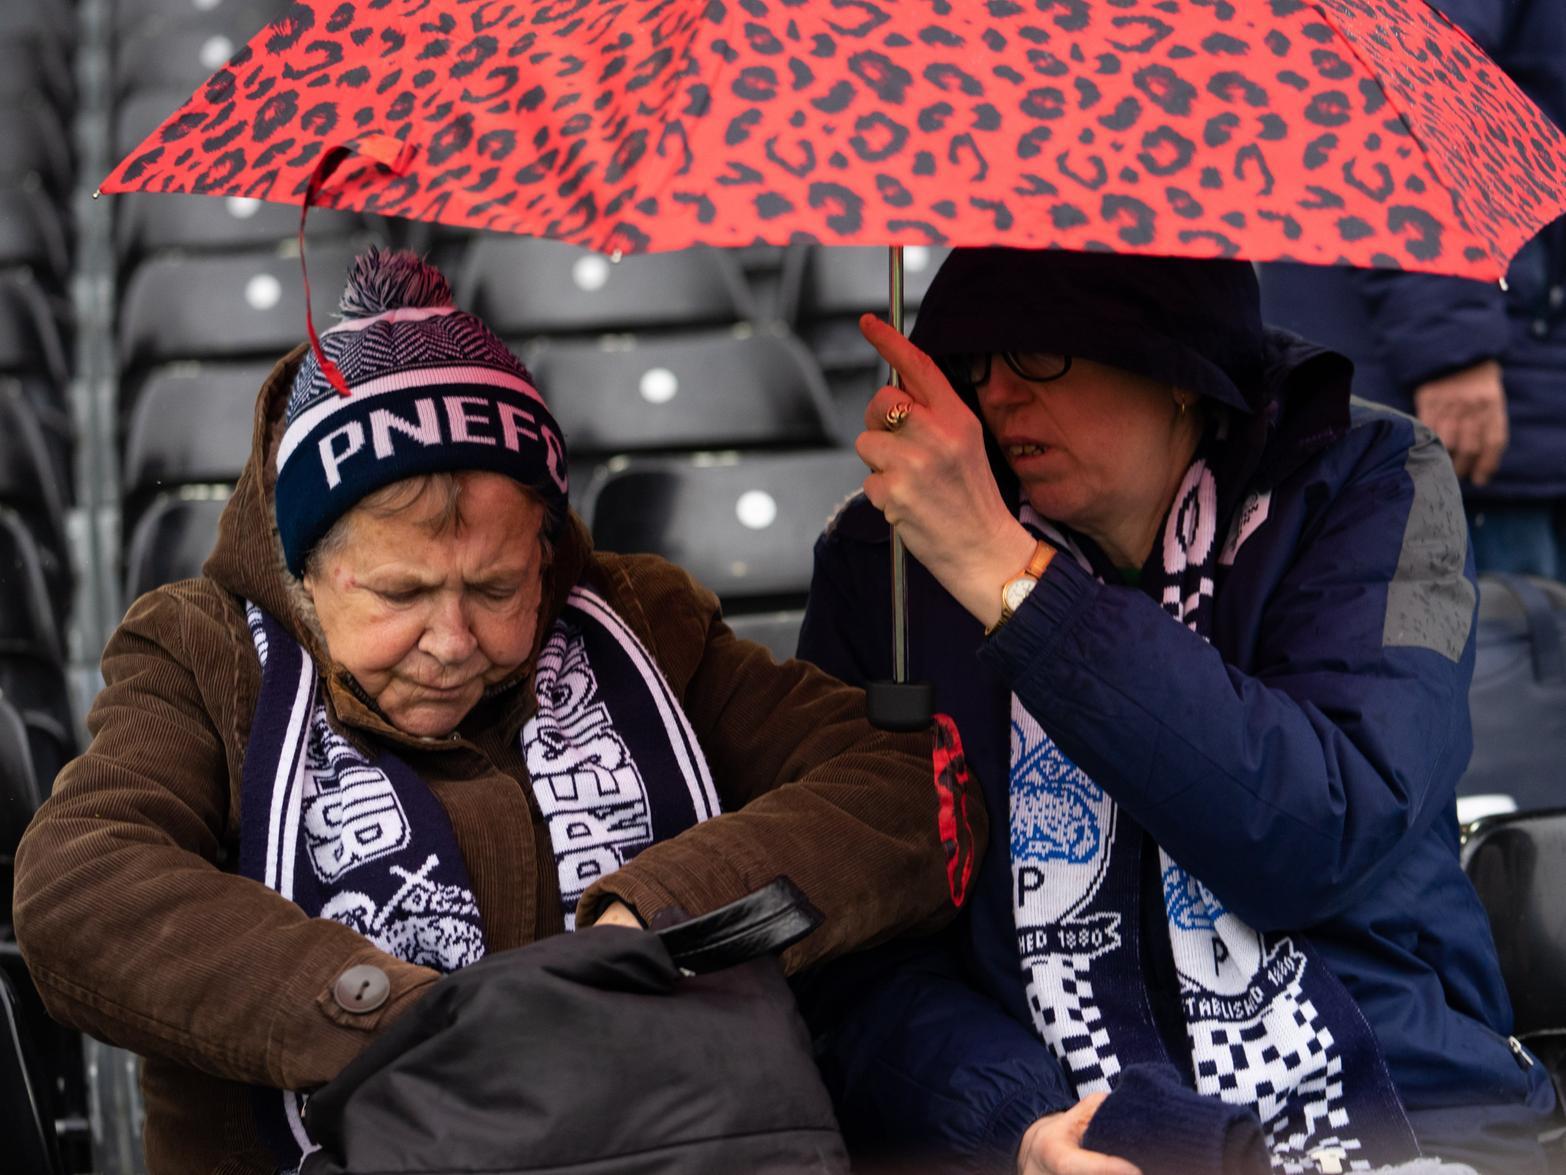 Two PNE supporters came prepared for the rain at Craven Cottage with the lower part of the travelling fans open to the rain.